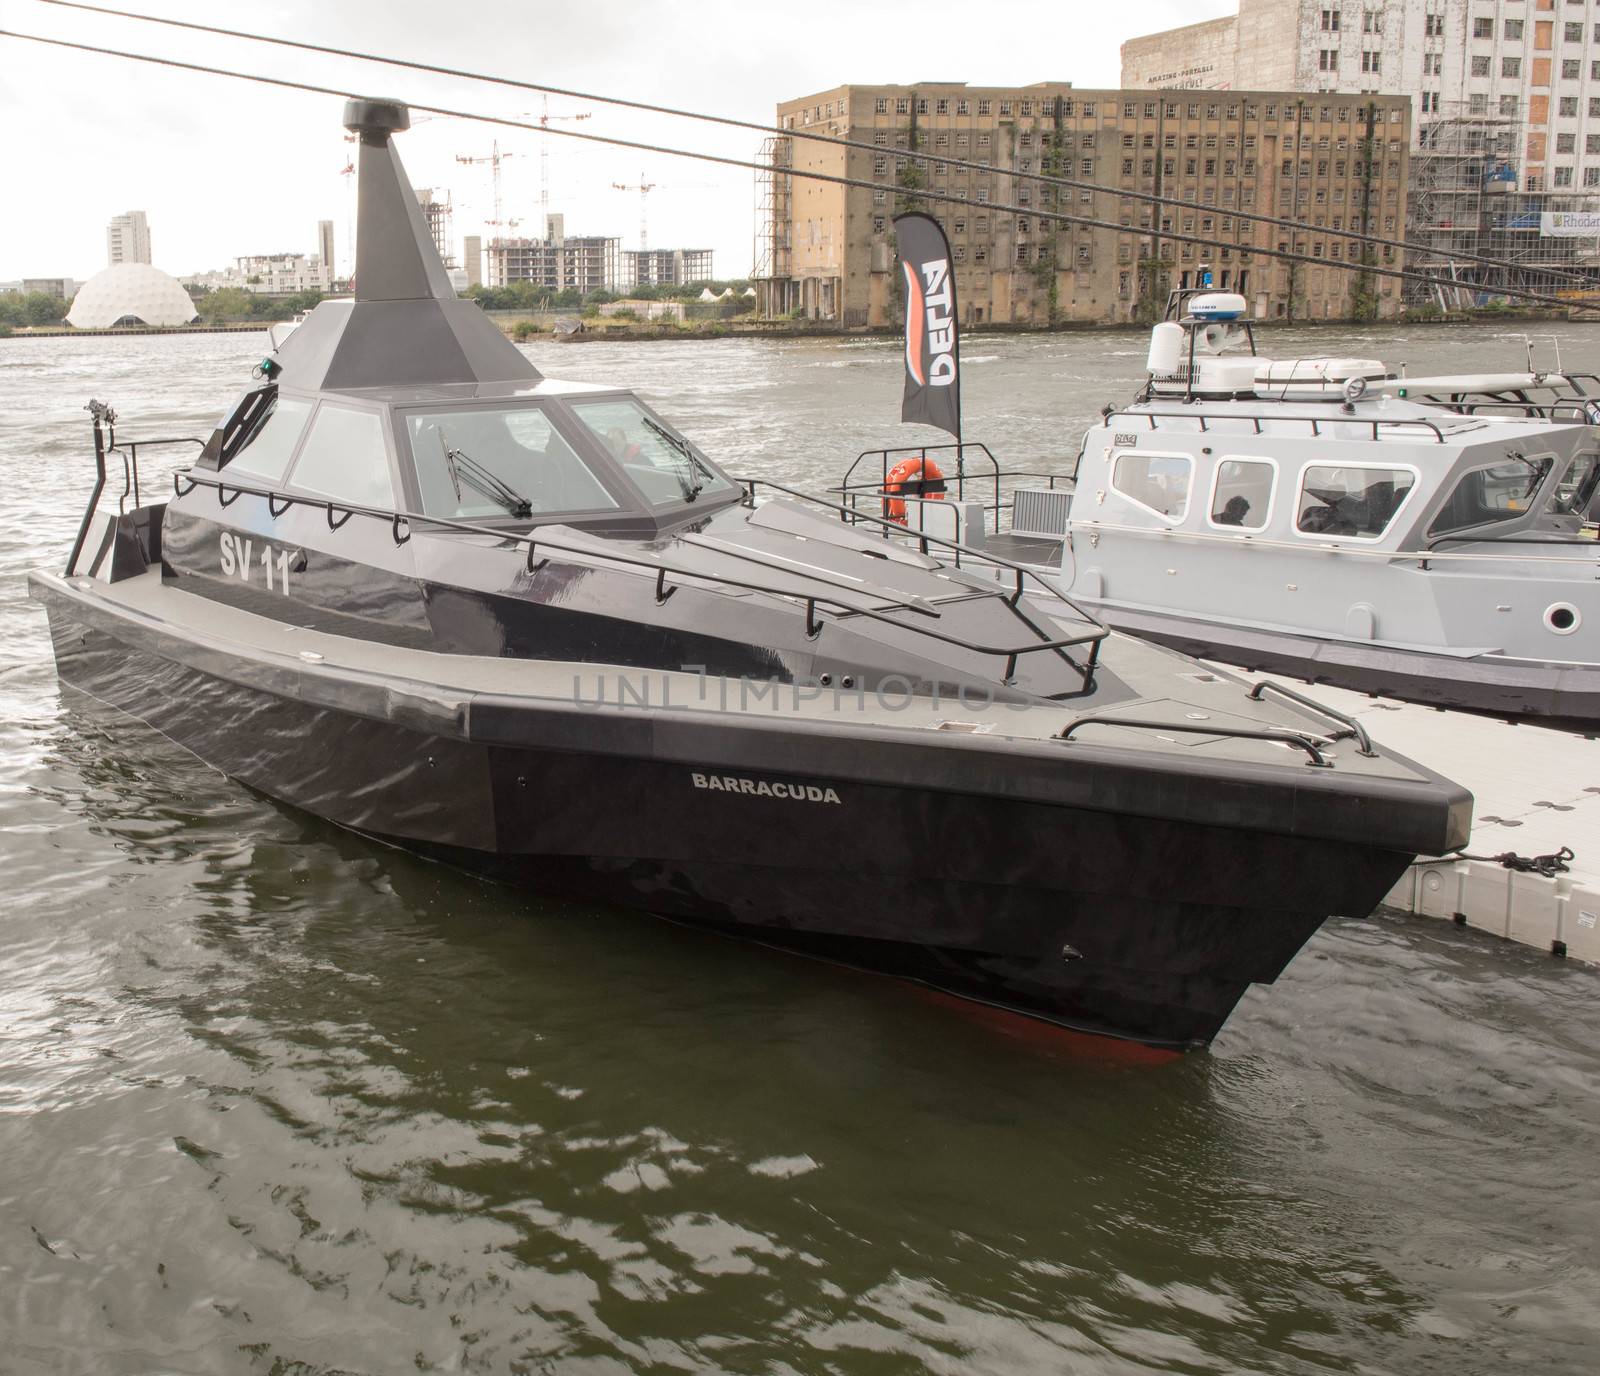 UNITED KINGDOM, London: Patrol craft	The Defence and Security International Exhibition (DSEI) began in London on September 15, 2015 despite a week of direct action protests by peace campaigners.  	The arms fair has seen over 30,000 people descend on London to see the 1,500 exhibitors who are displaying weapons of war from pistols and rifles up to tanks, assault helicopters and warships.  	Protesters attempted to block the main road into the exhibition, claiming that such an event strengthened the UK's ties to human rights abuses. 